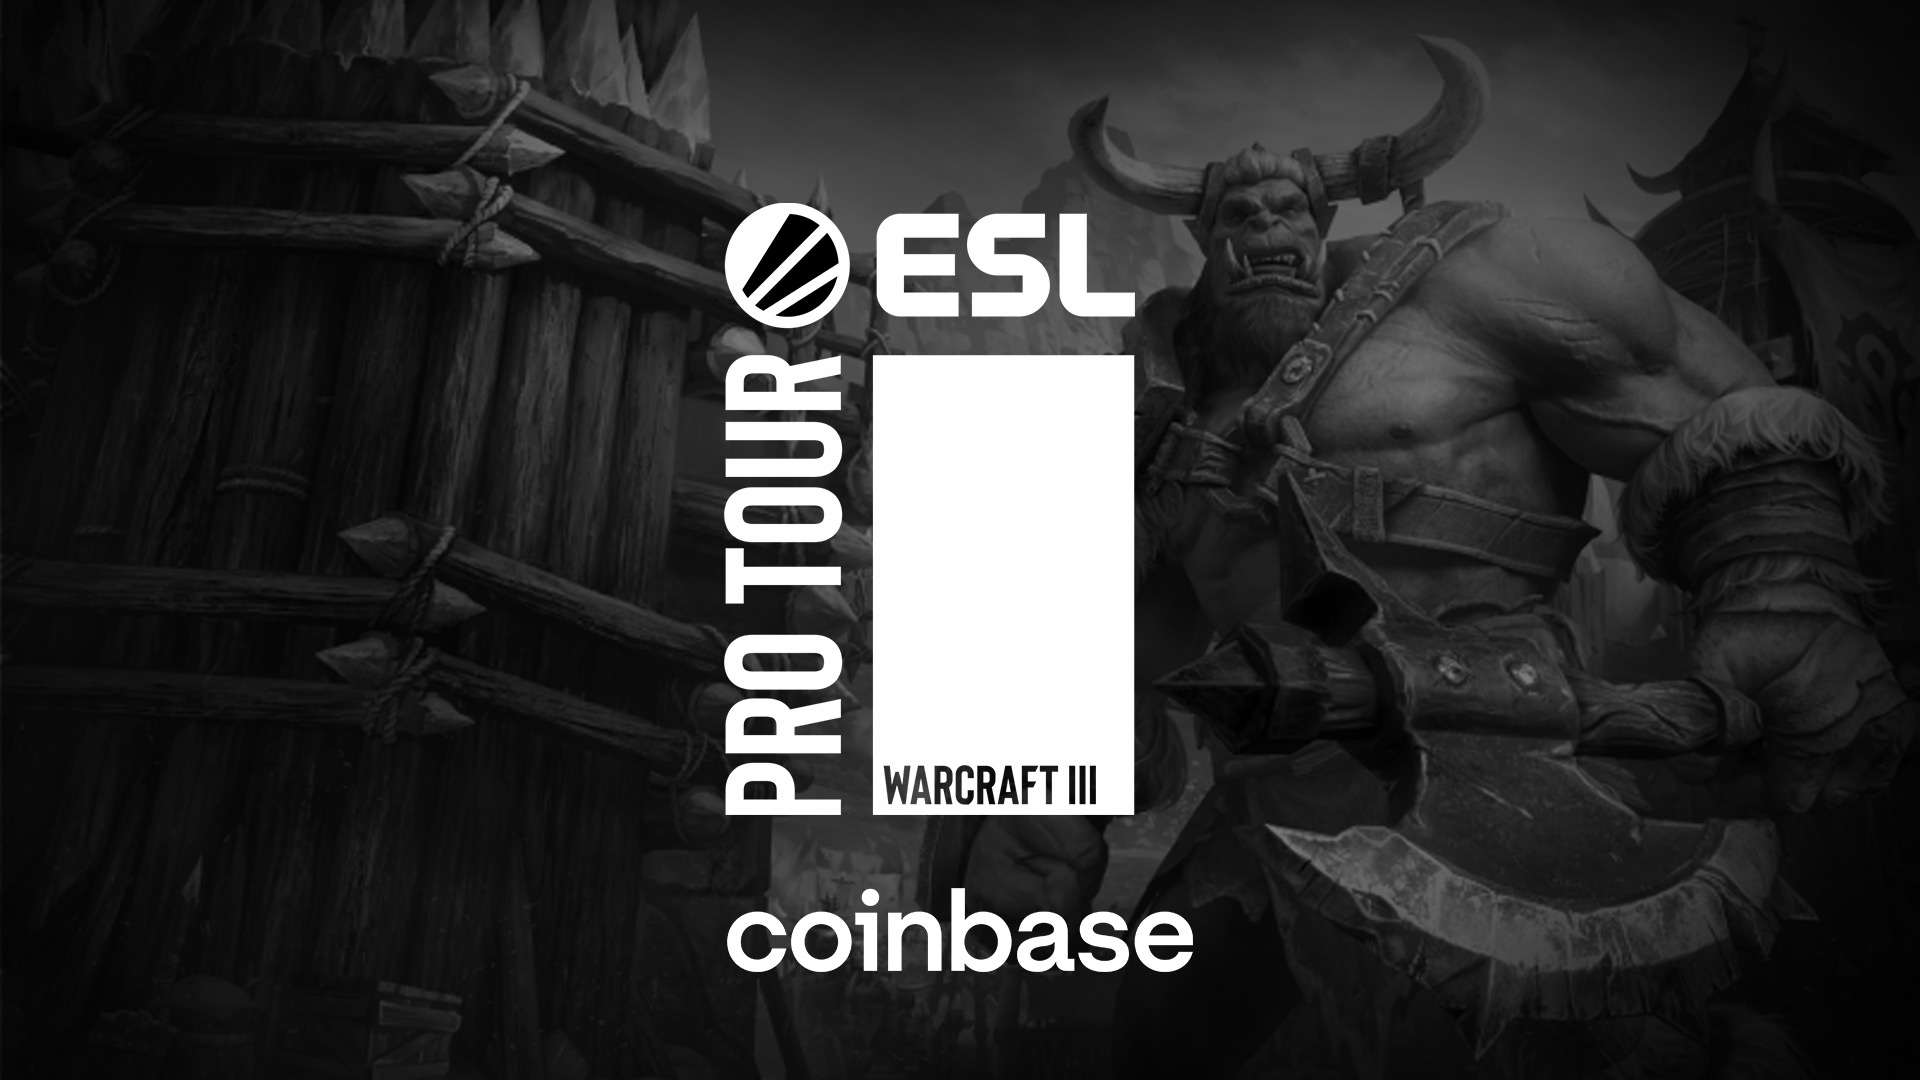 Coinbase is joining ESL Pro Tour Warcraft III as partner ...